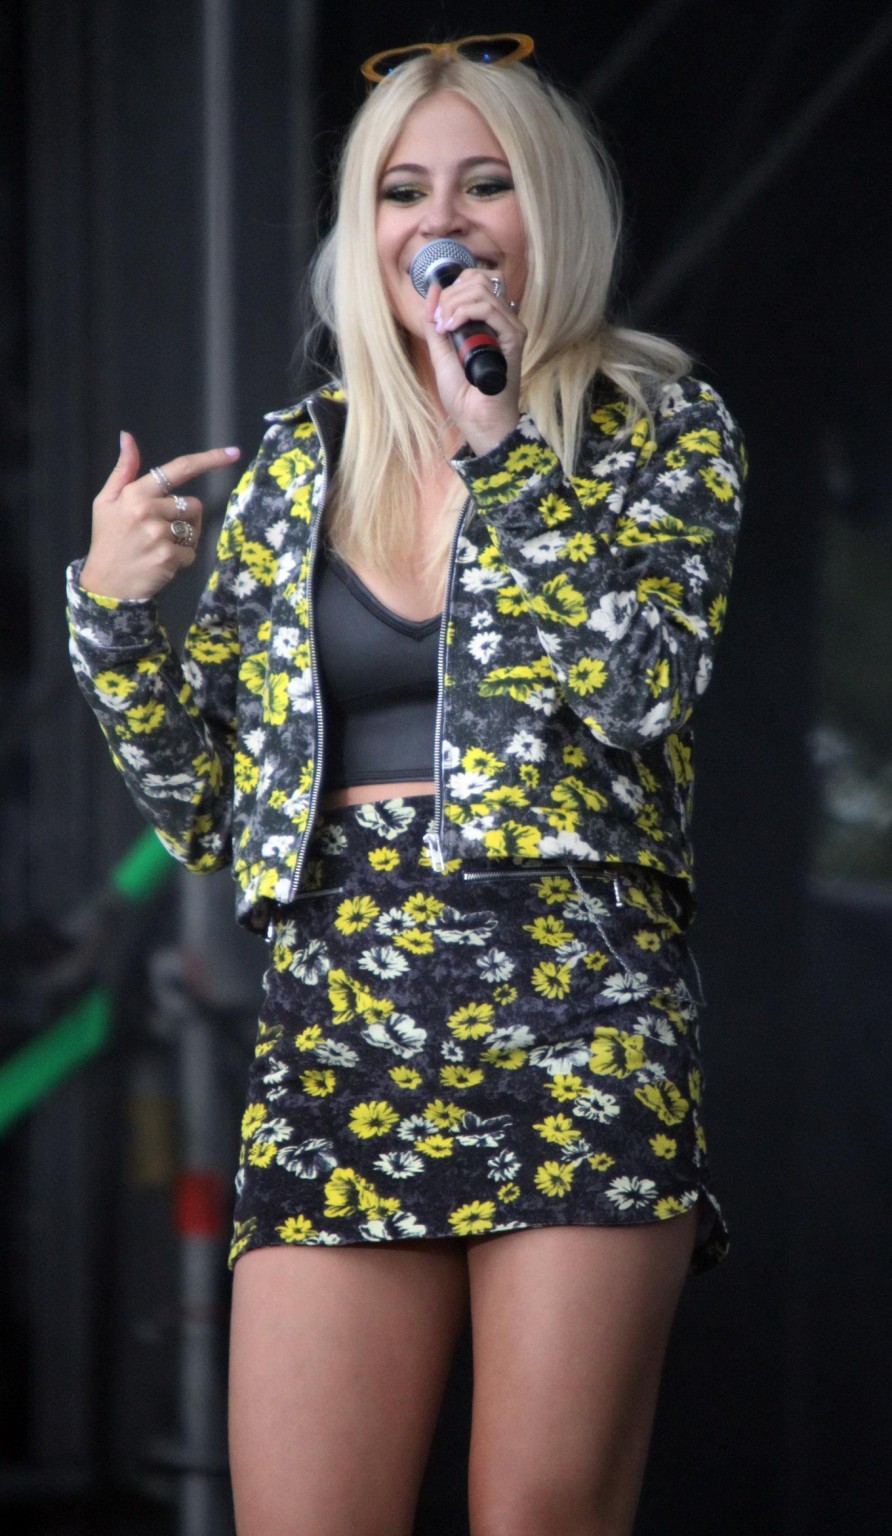 Pixie Lott upskirt on stage at Total Access Live 2014 in Cheshire #75188544